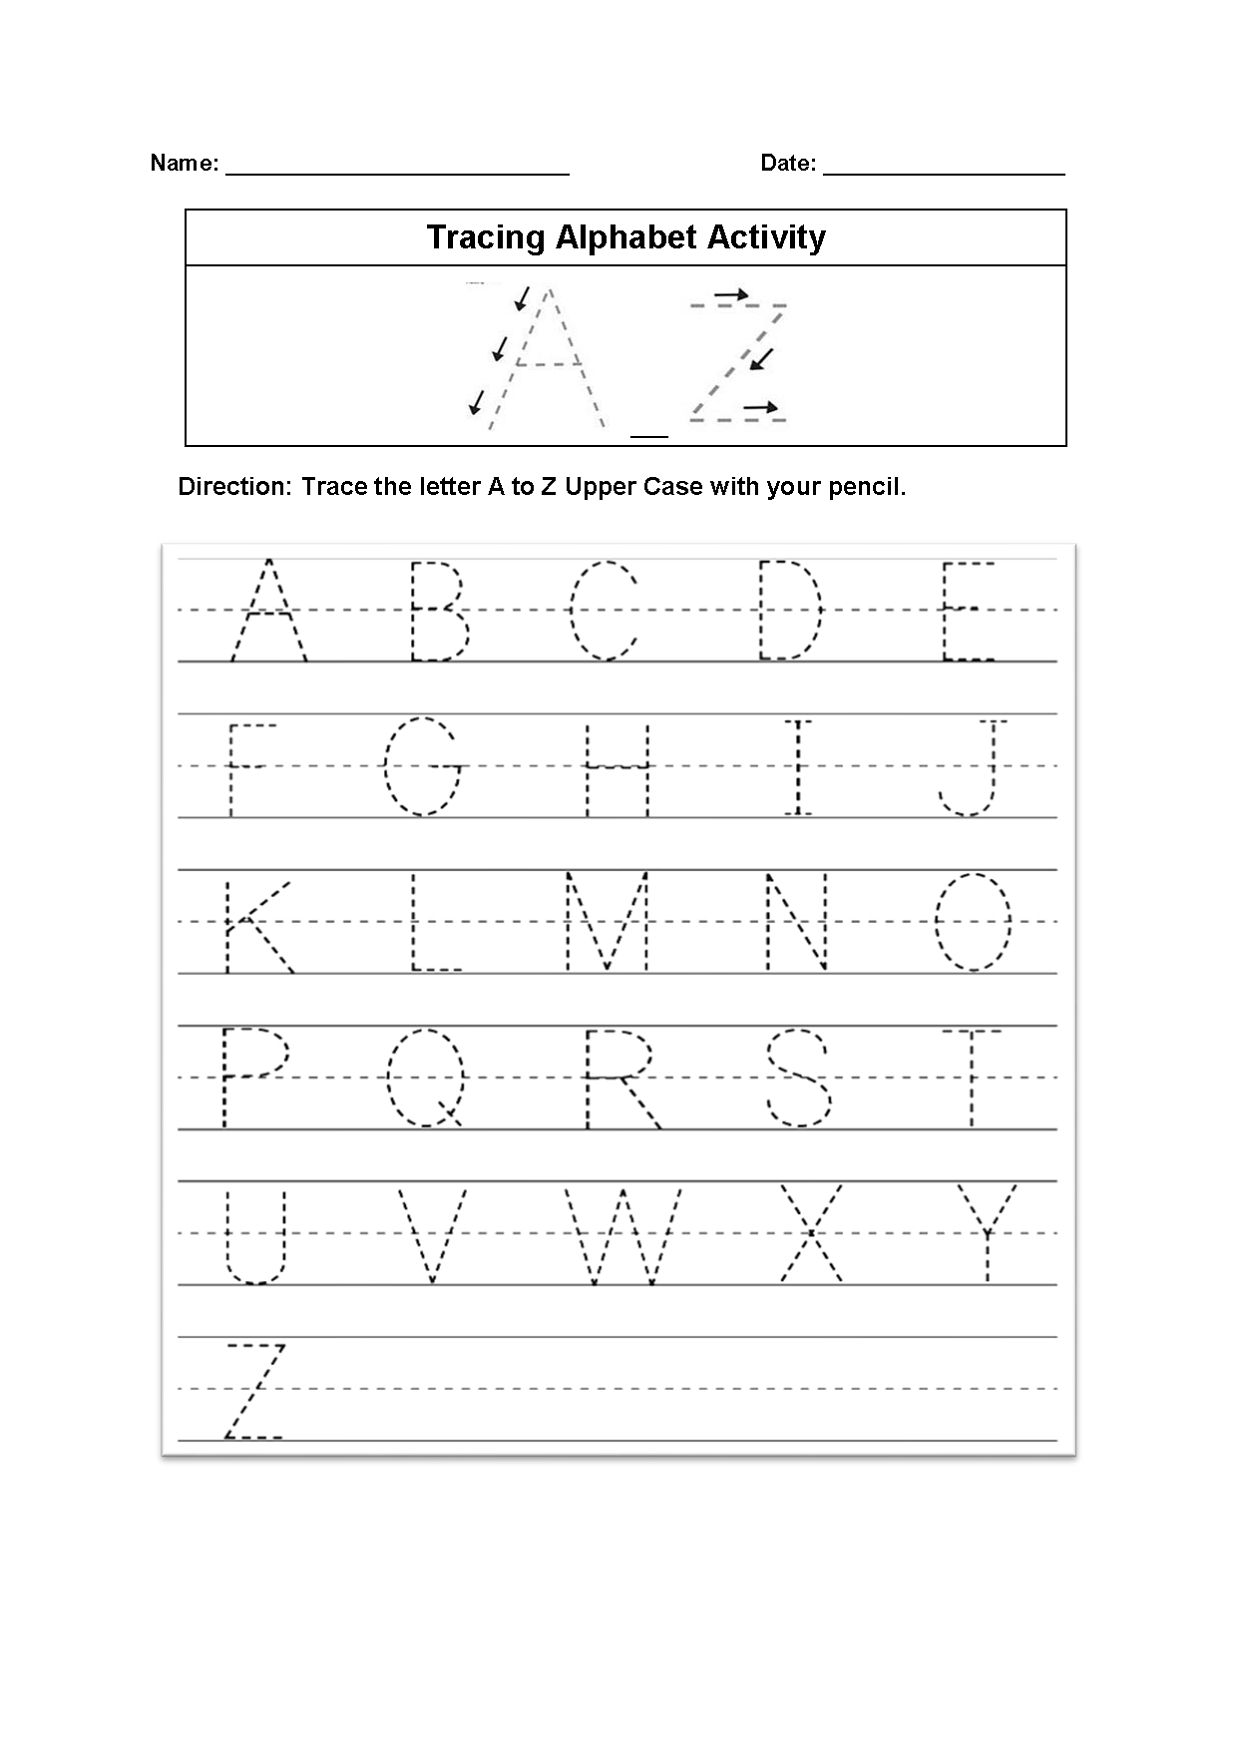 Tracing Alphabet Worksheets – Kids Learning Activity with Letter A Alphabet Worksheets